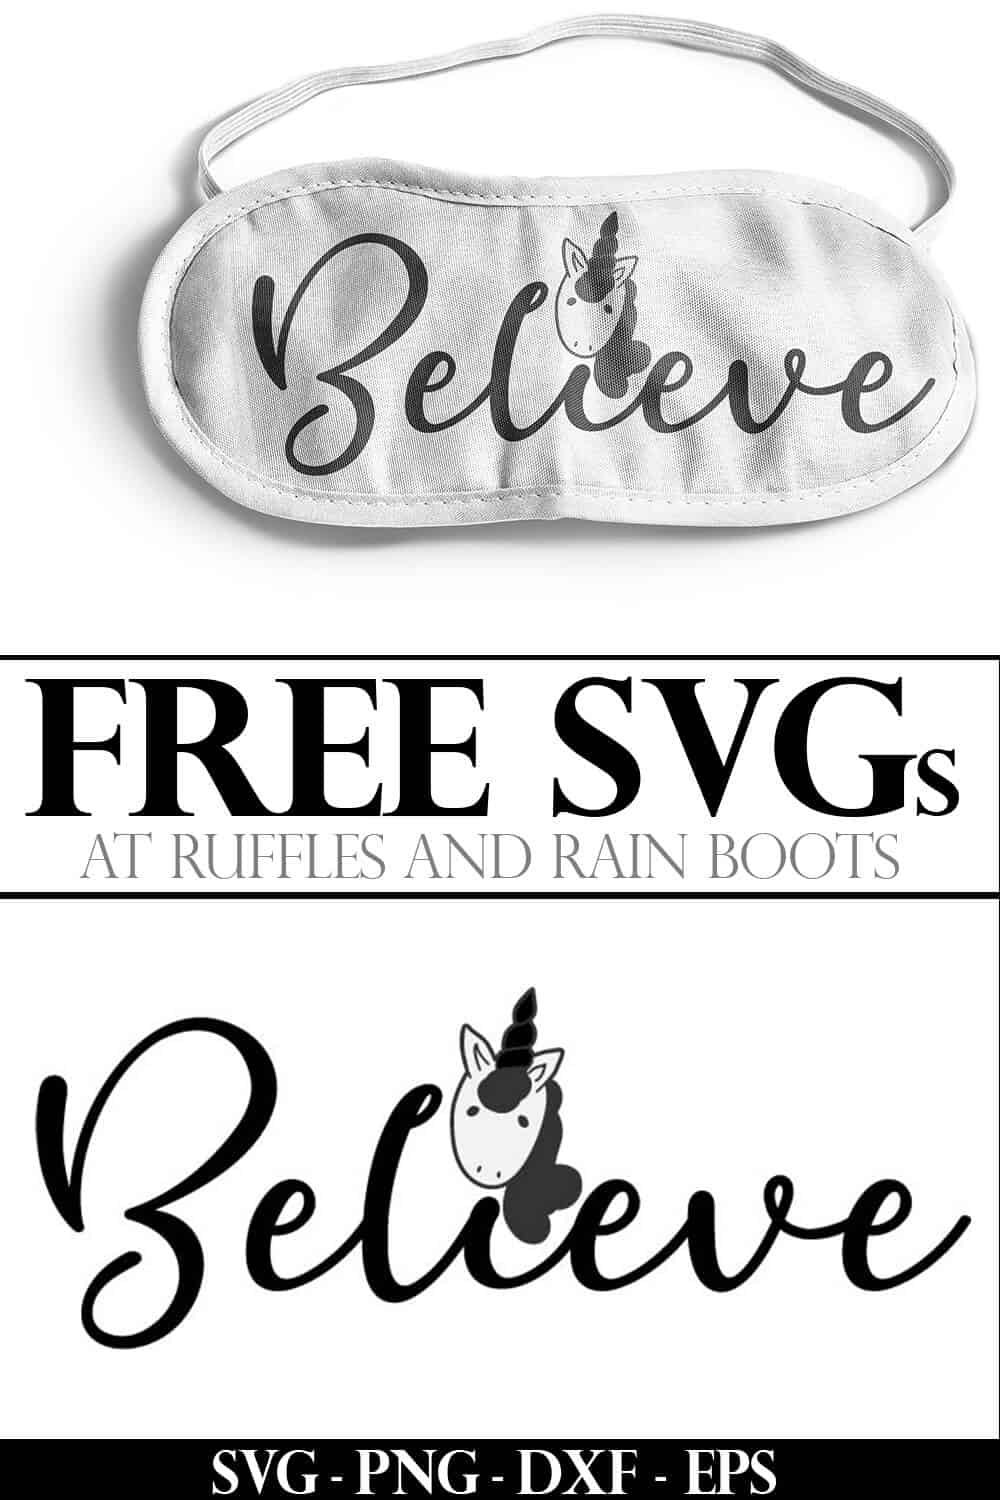 Believe free unicorn cut file for cricut on sleep mask on a white background with text which reads free svgs